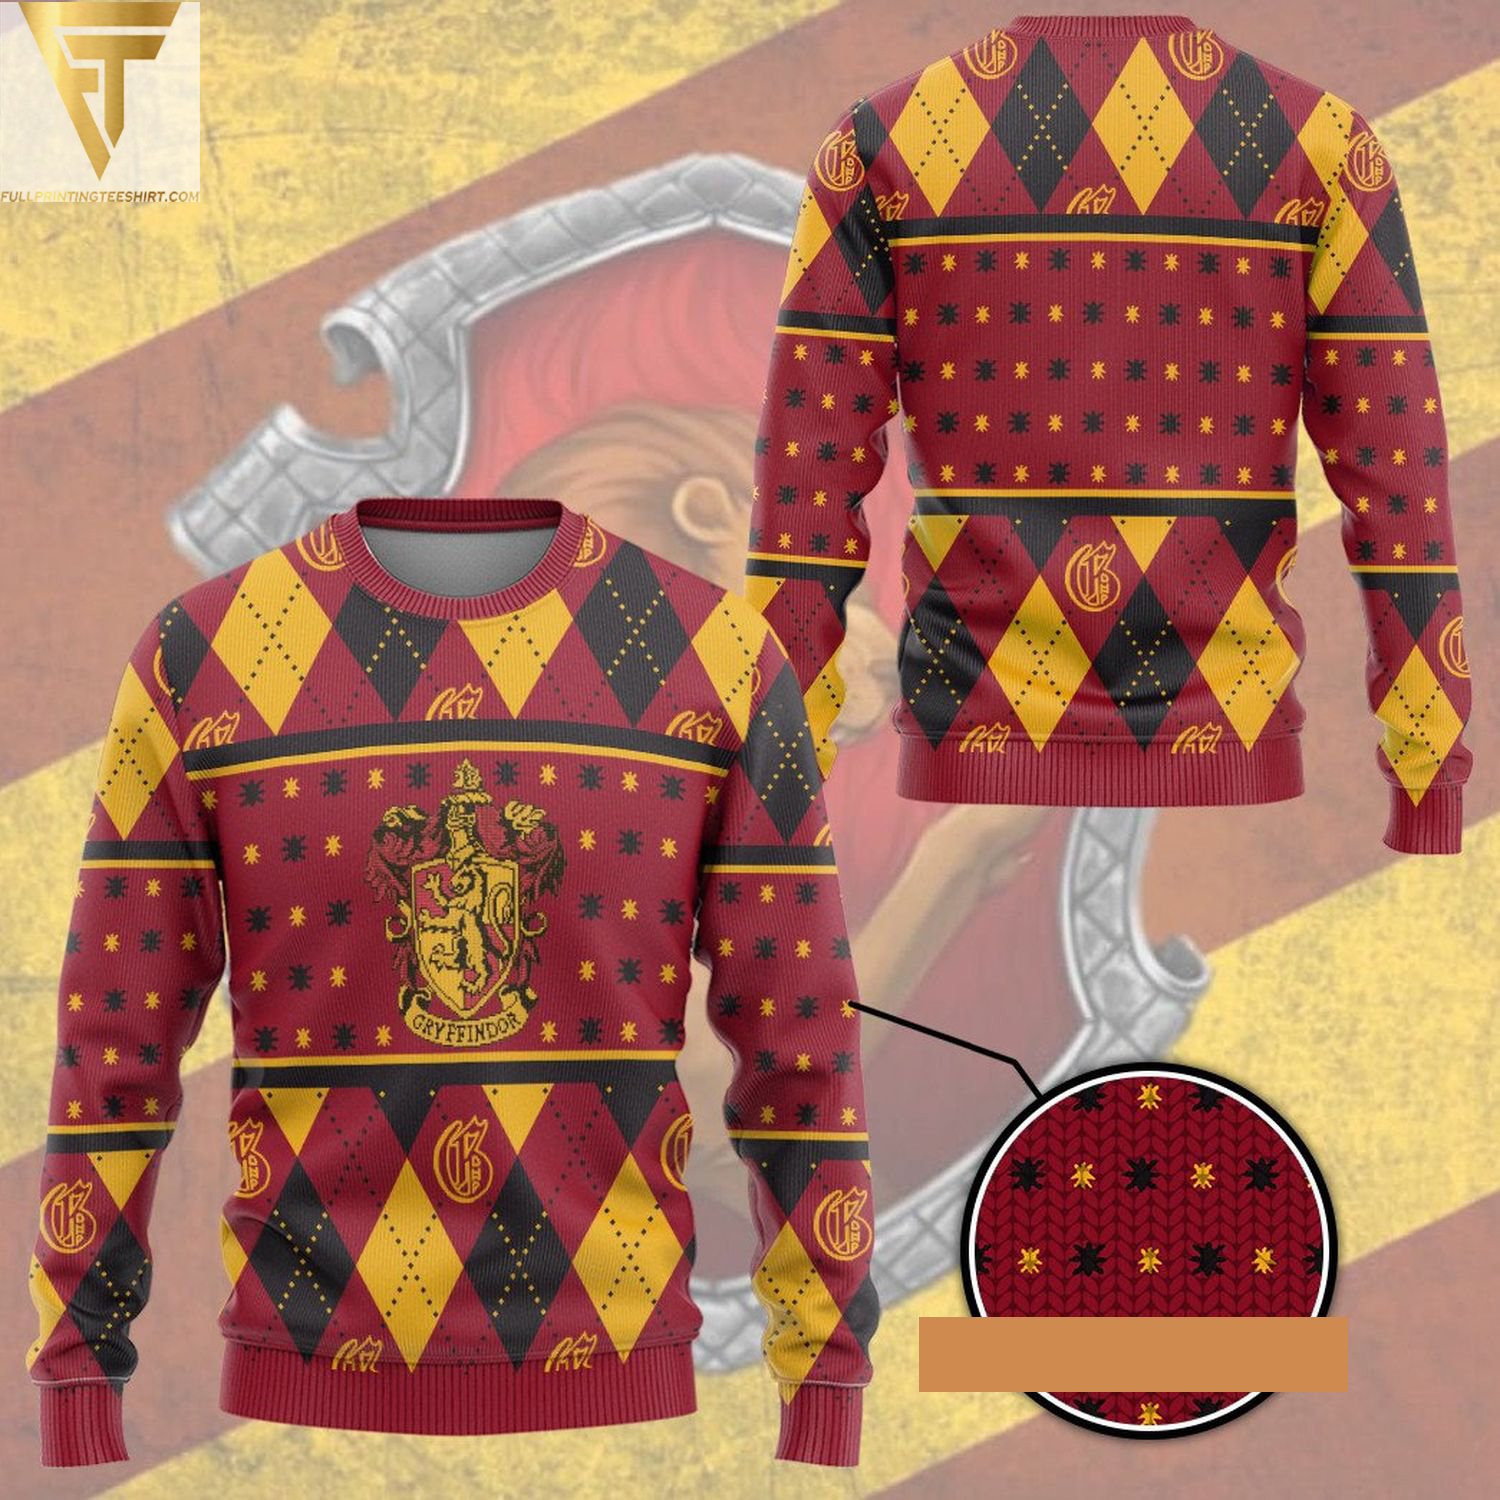 Harry potter gryffindor crest holiday ugly christmas sweater